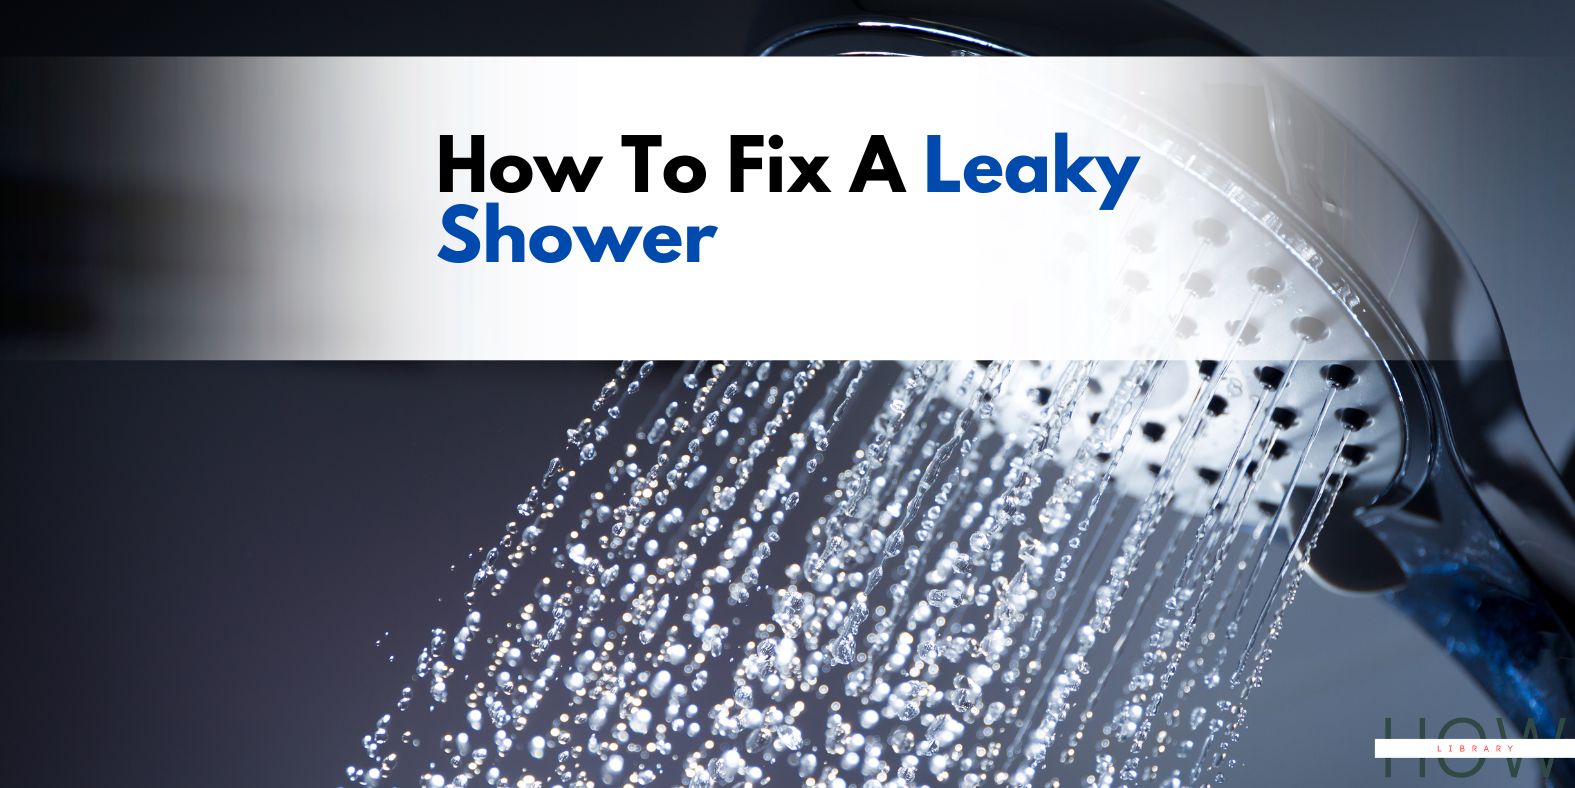 How To Fix A Leaky Shower